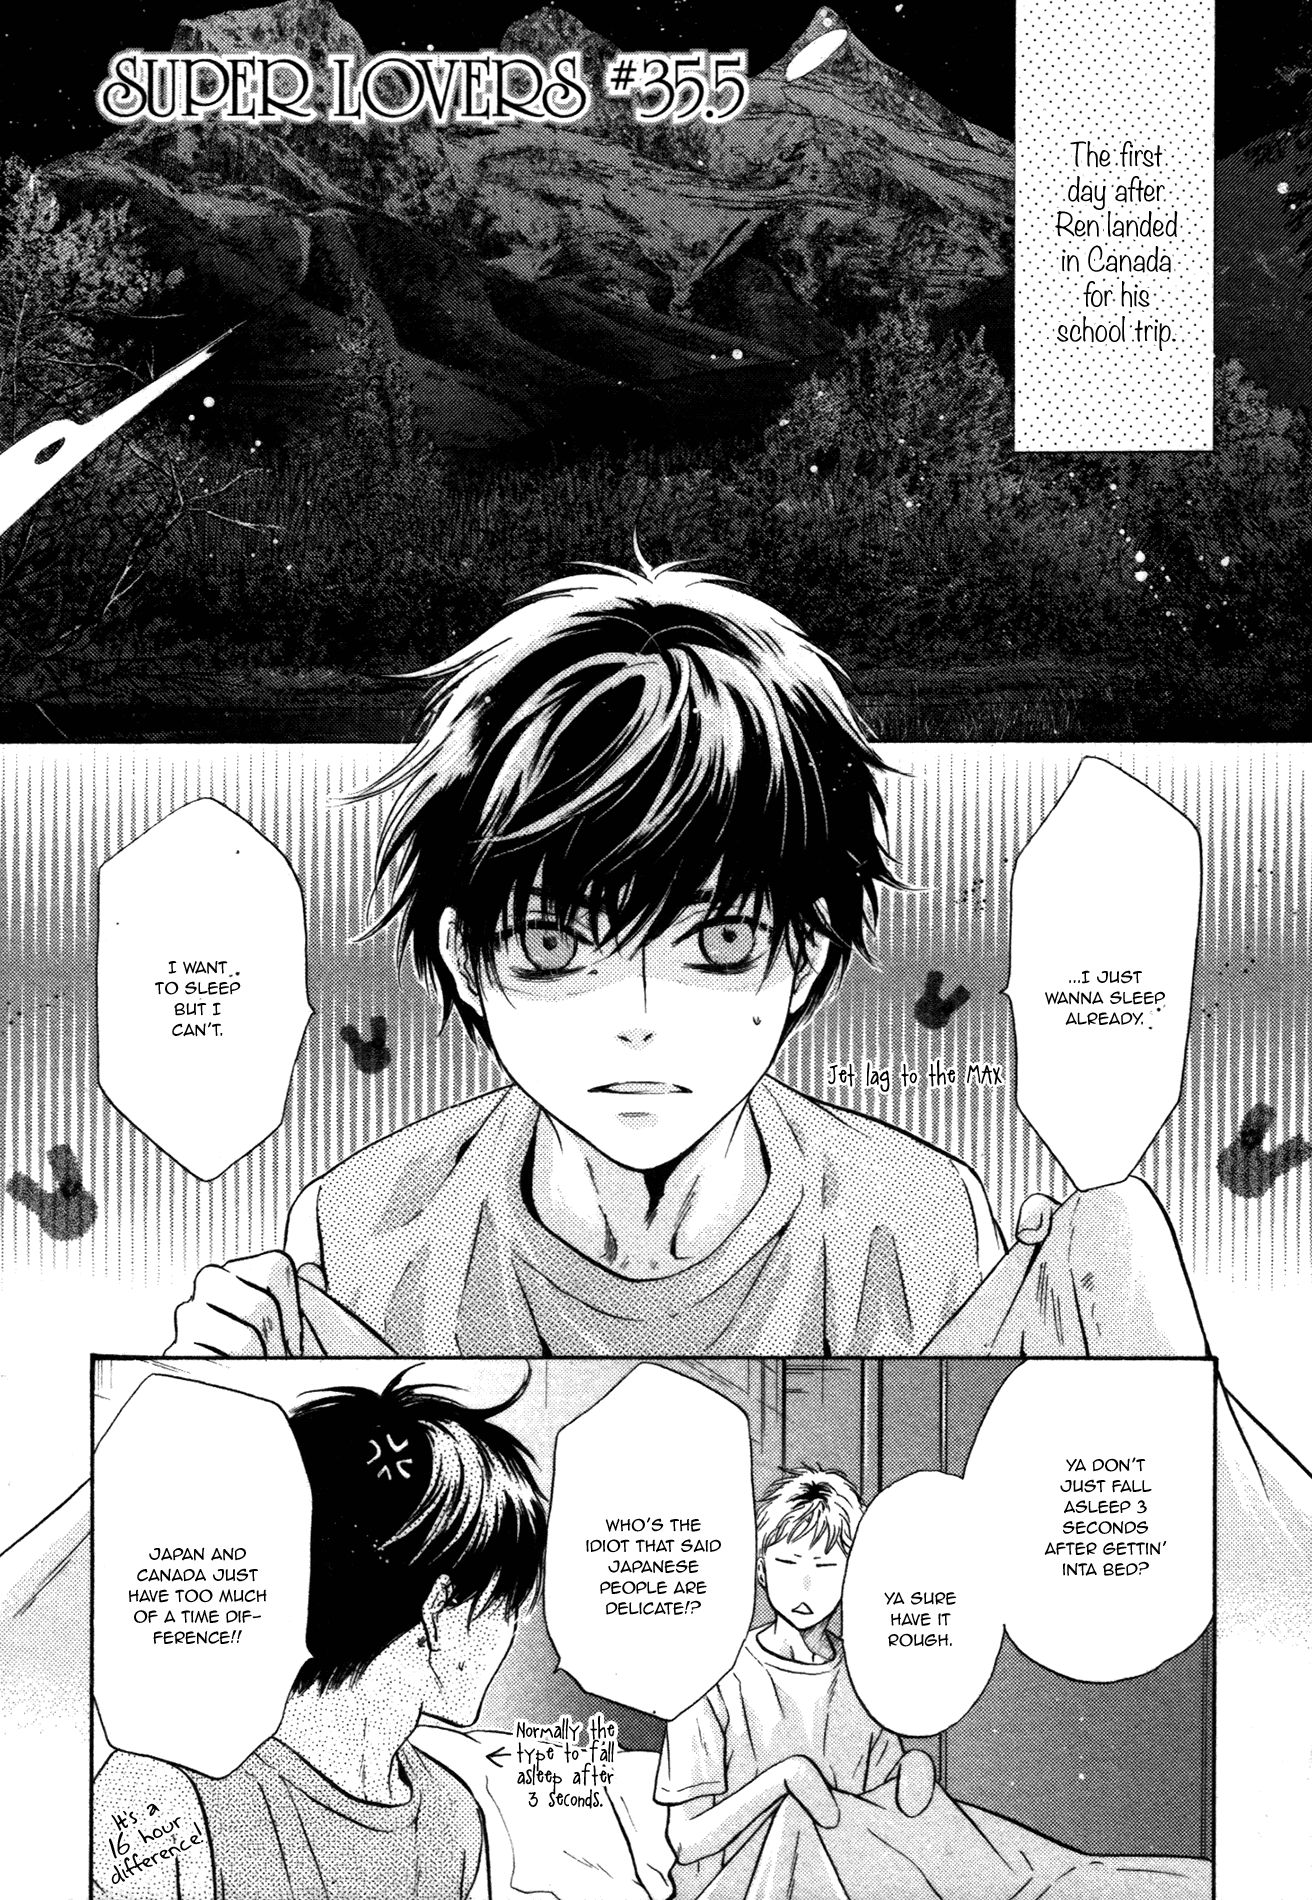 Super Lovers - 35.5 page 1